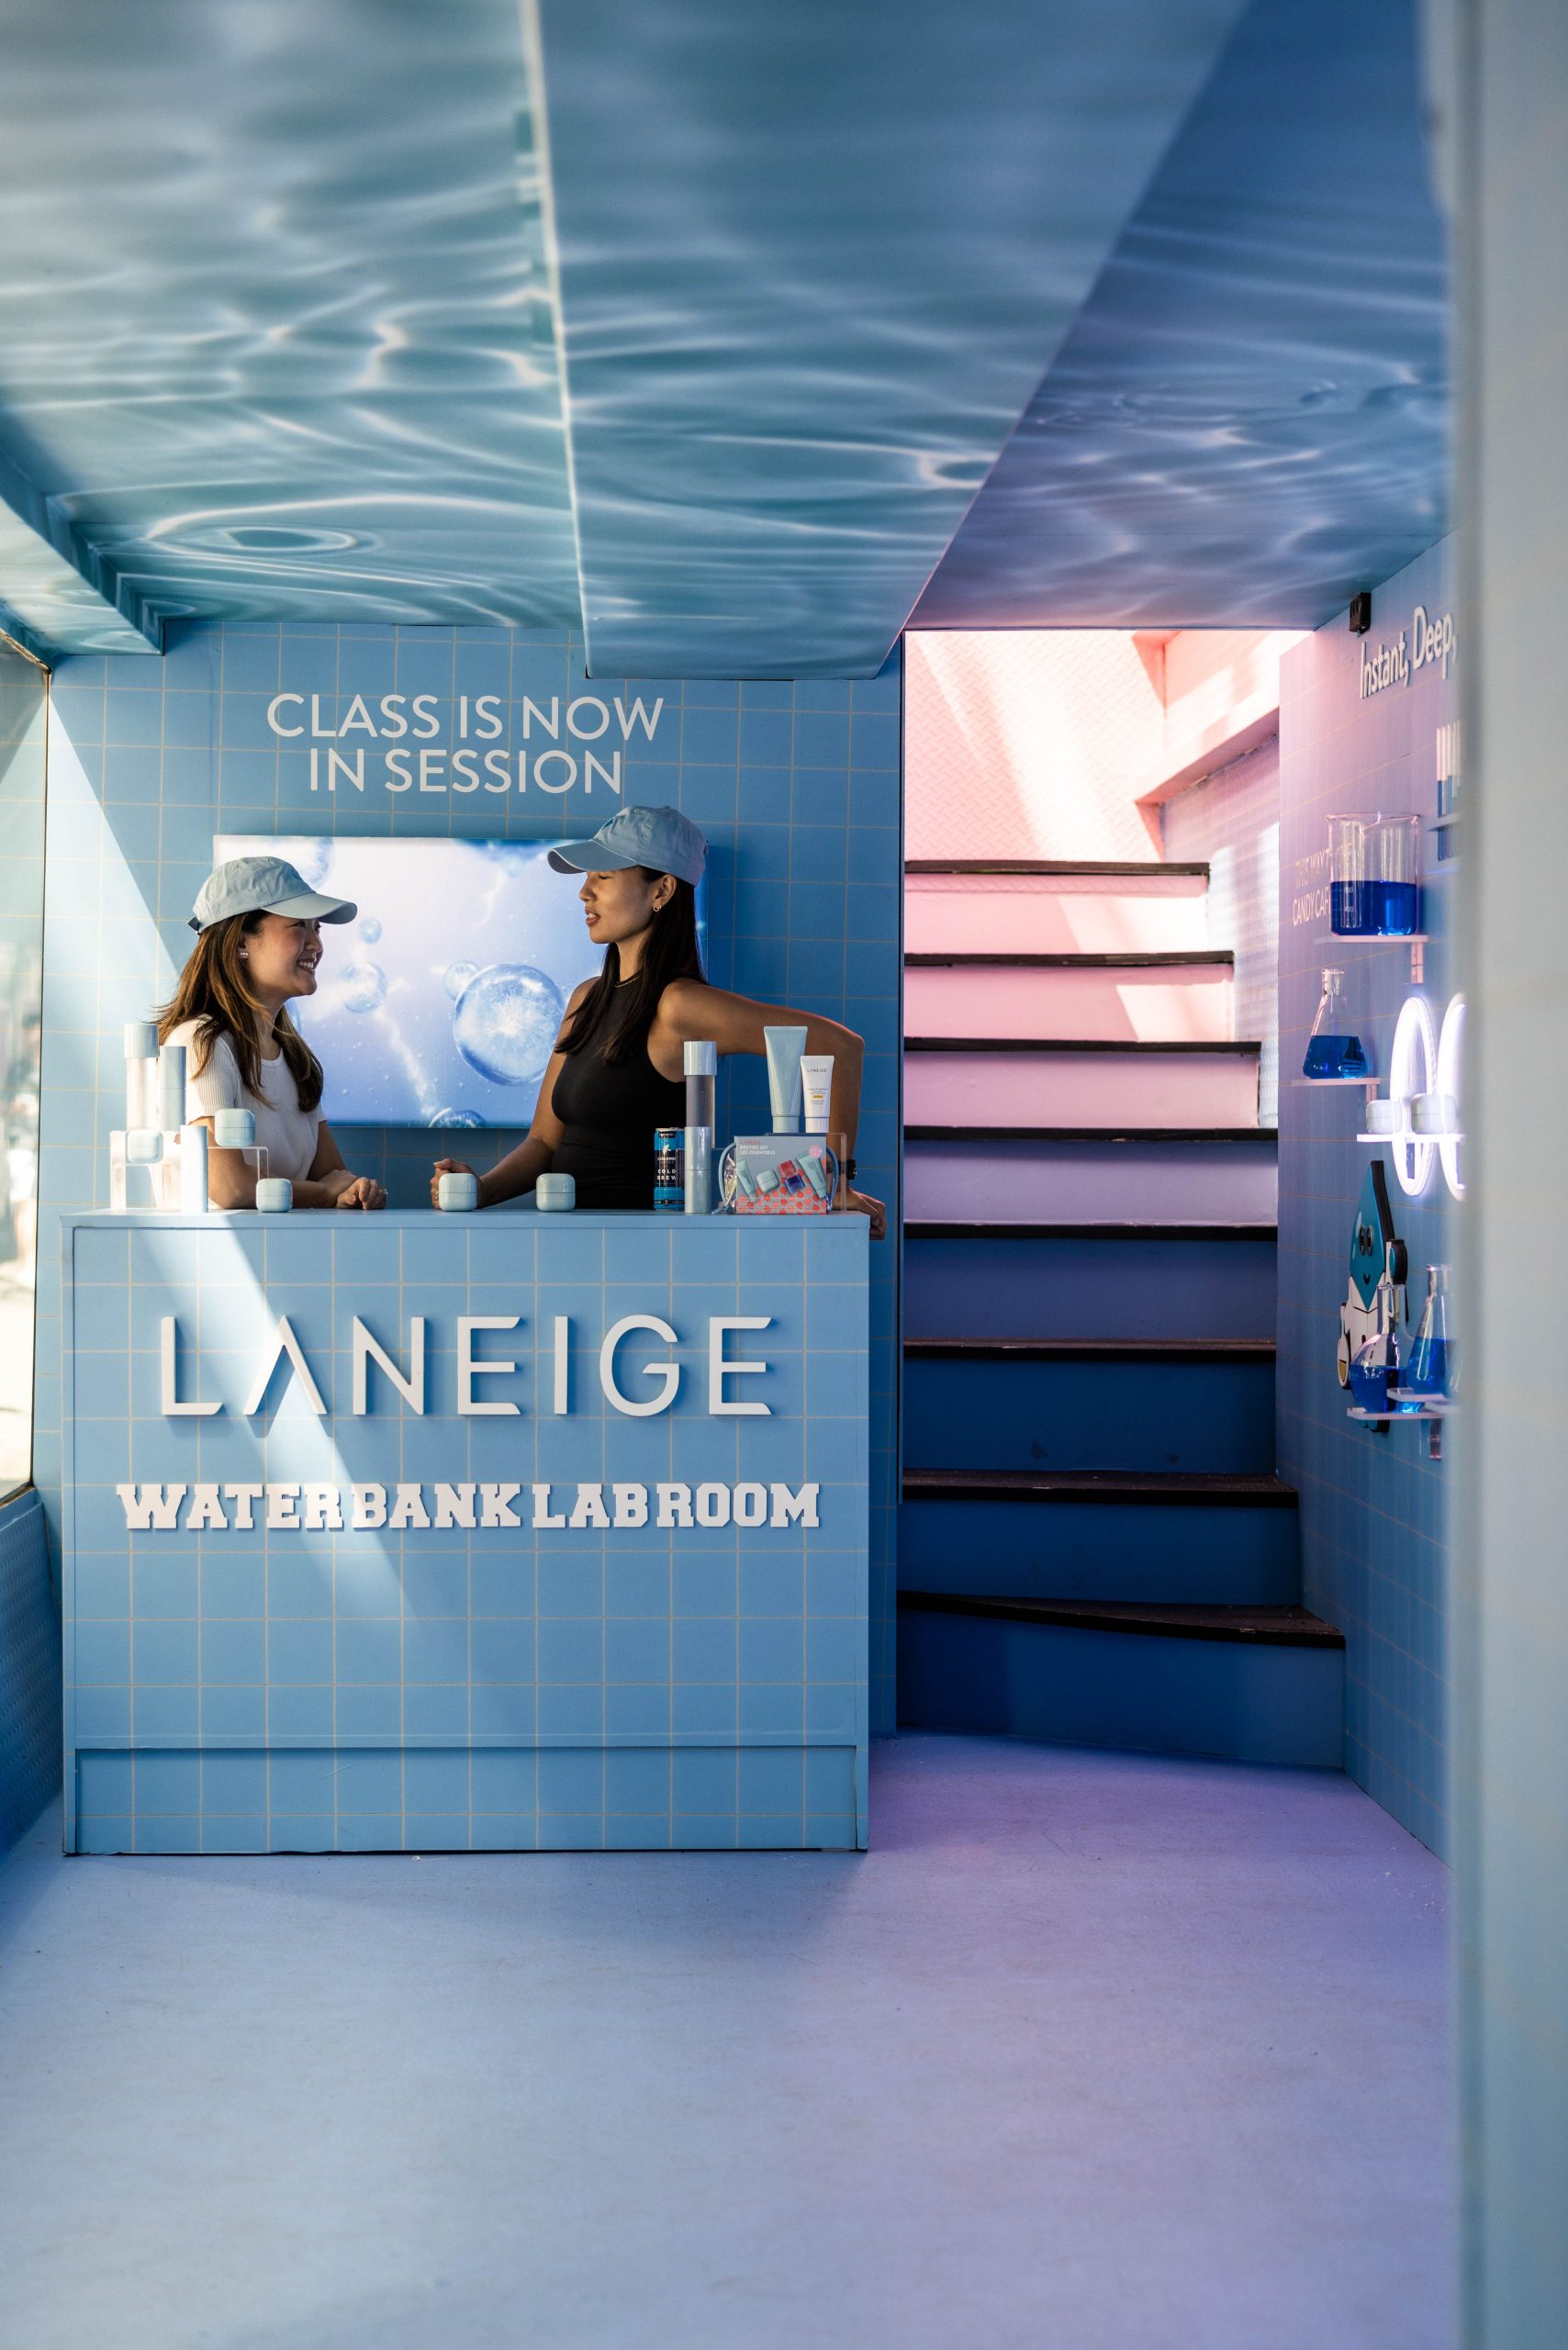 Laneige beauty pop up photo booth moment.